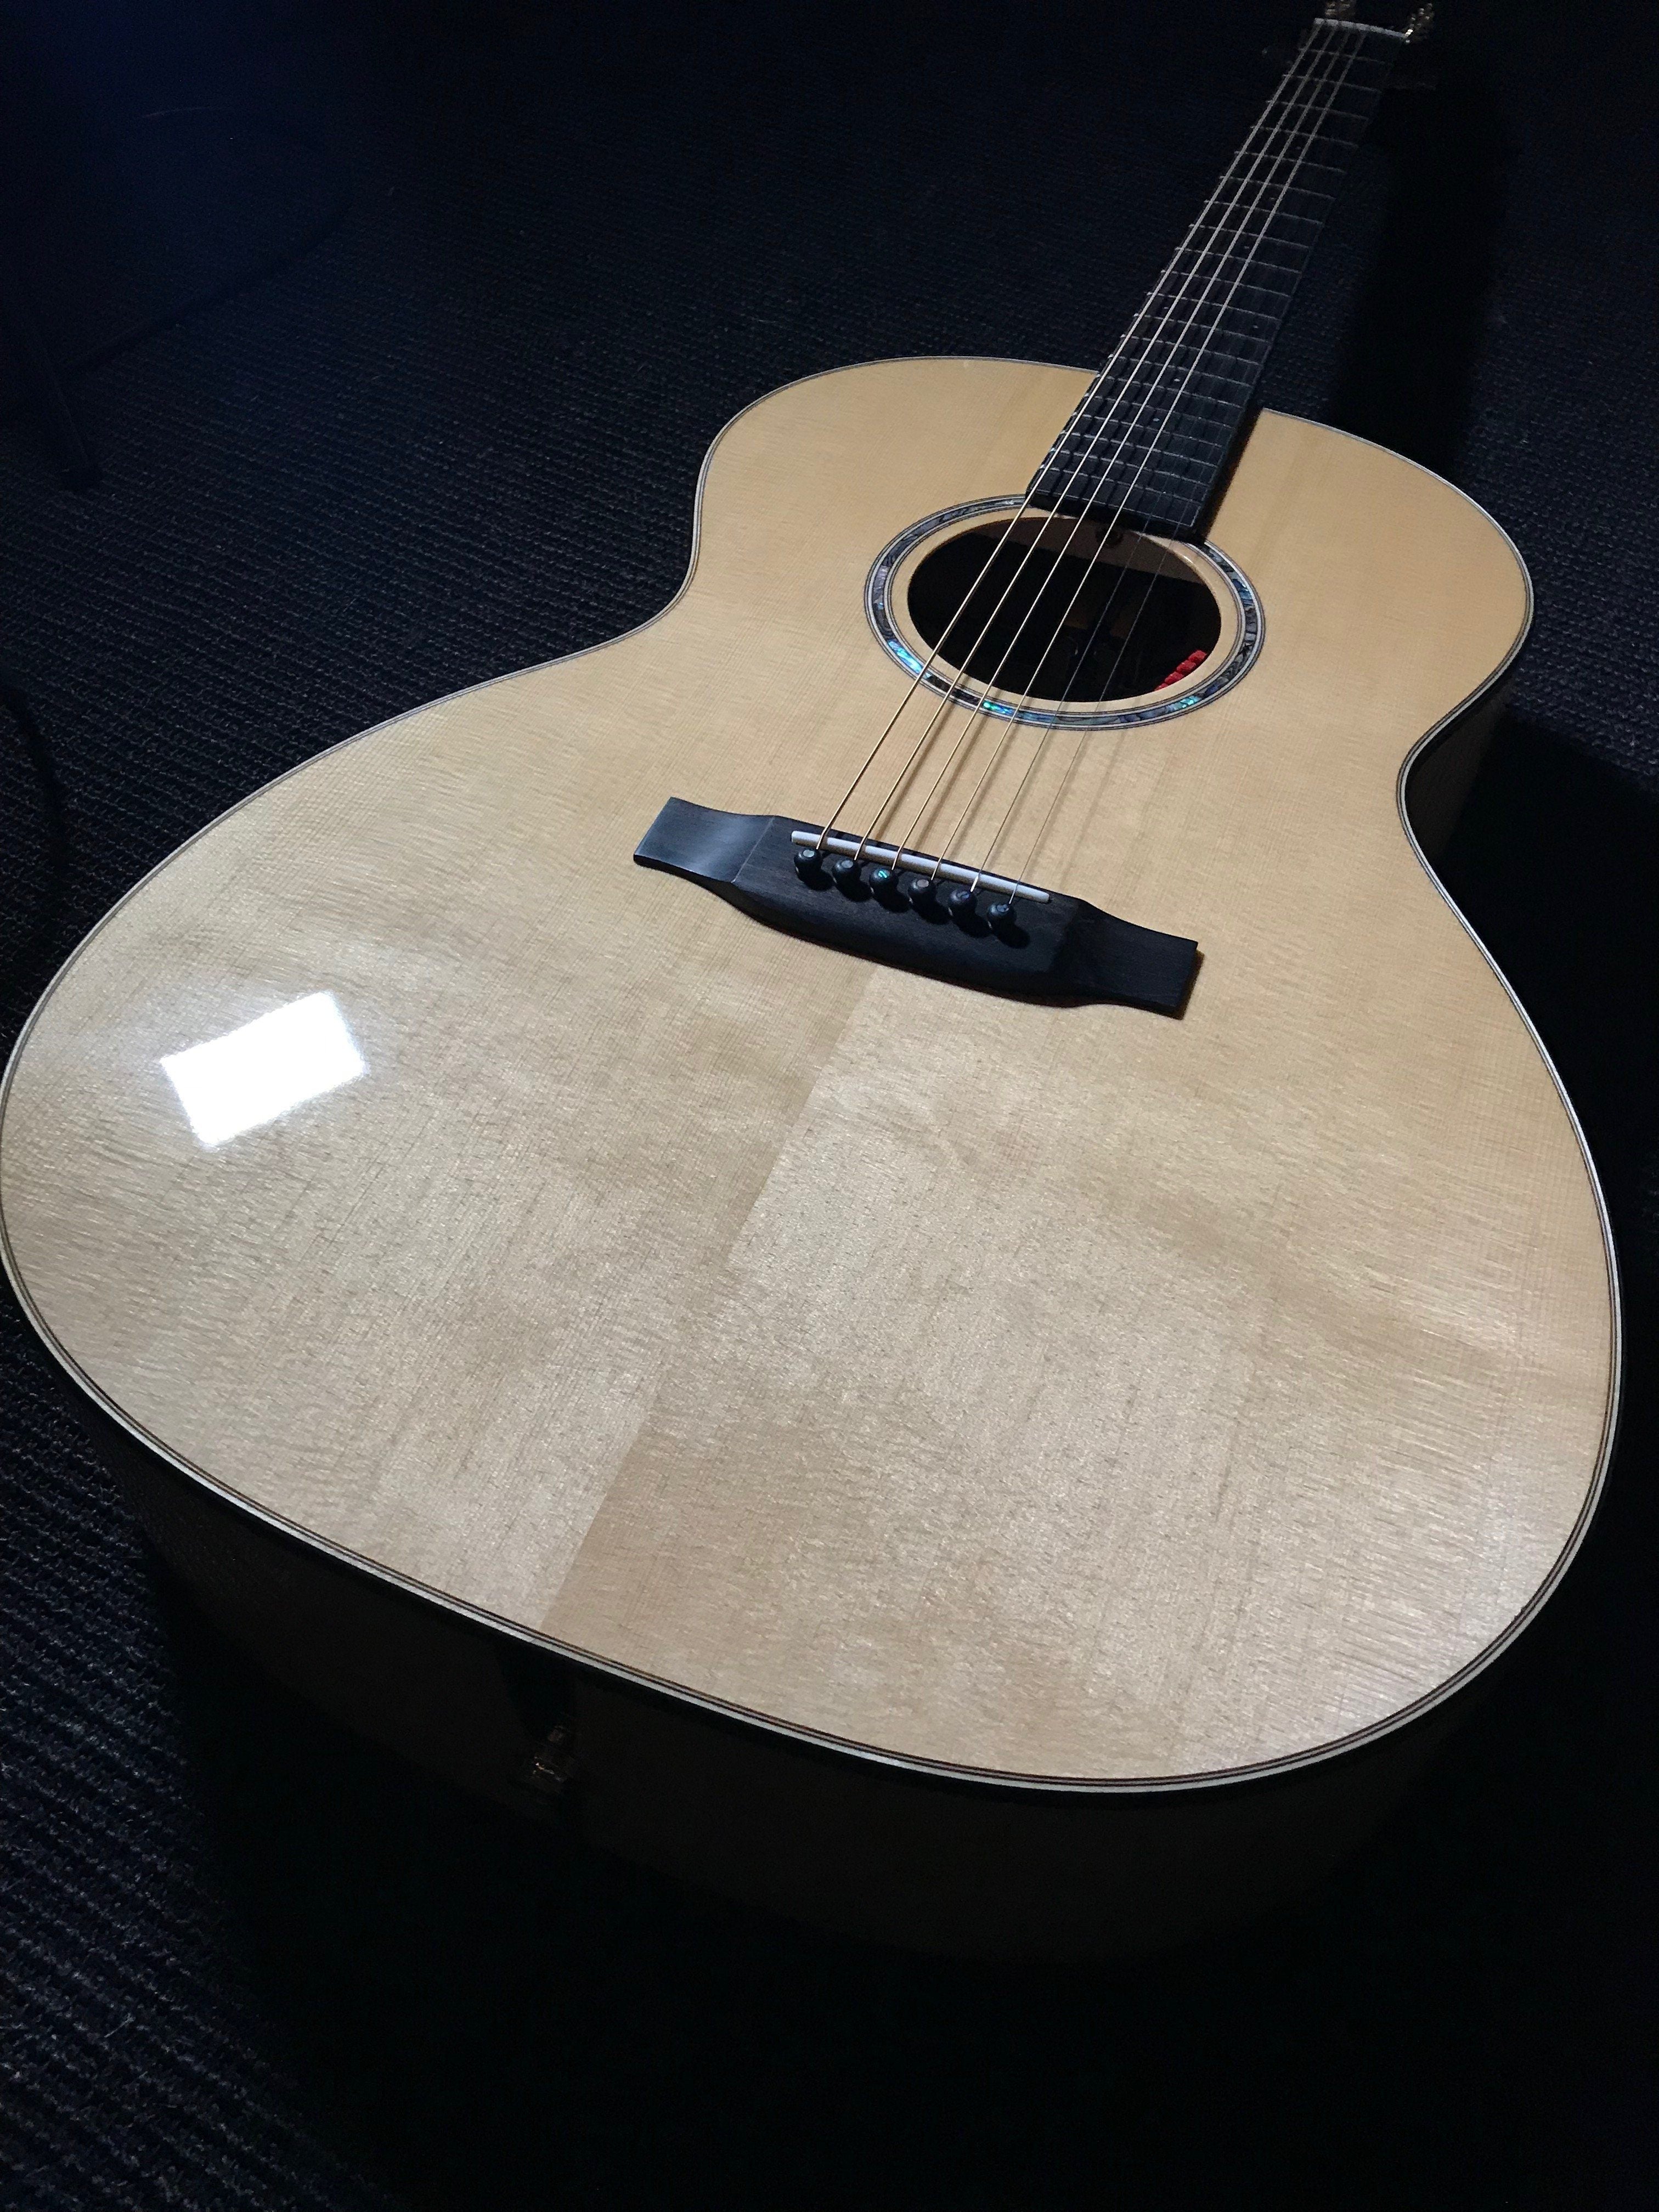 Auden Artist 45 Chester Maple Fullbody., Electro Acoustic Guitar for sale at Richards Guitars.